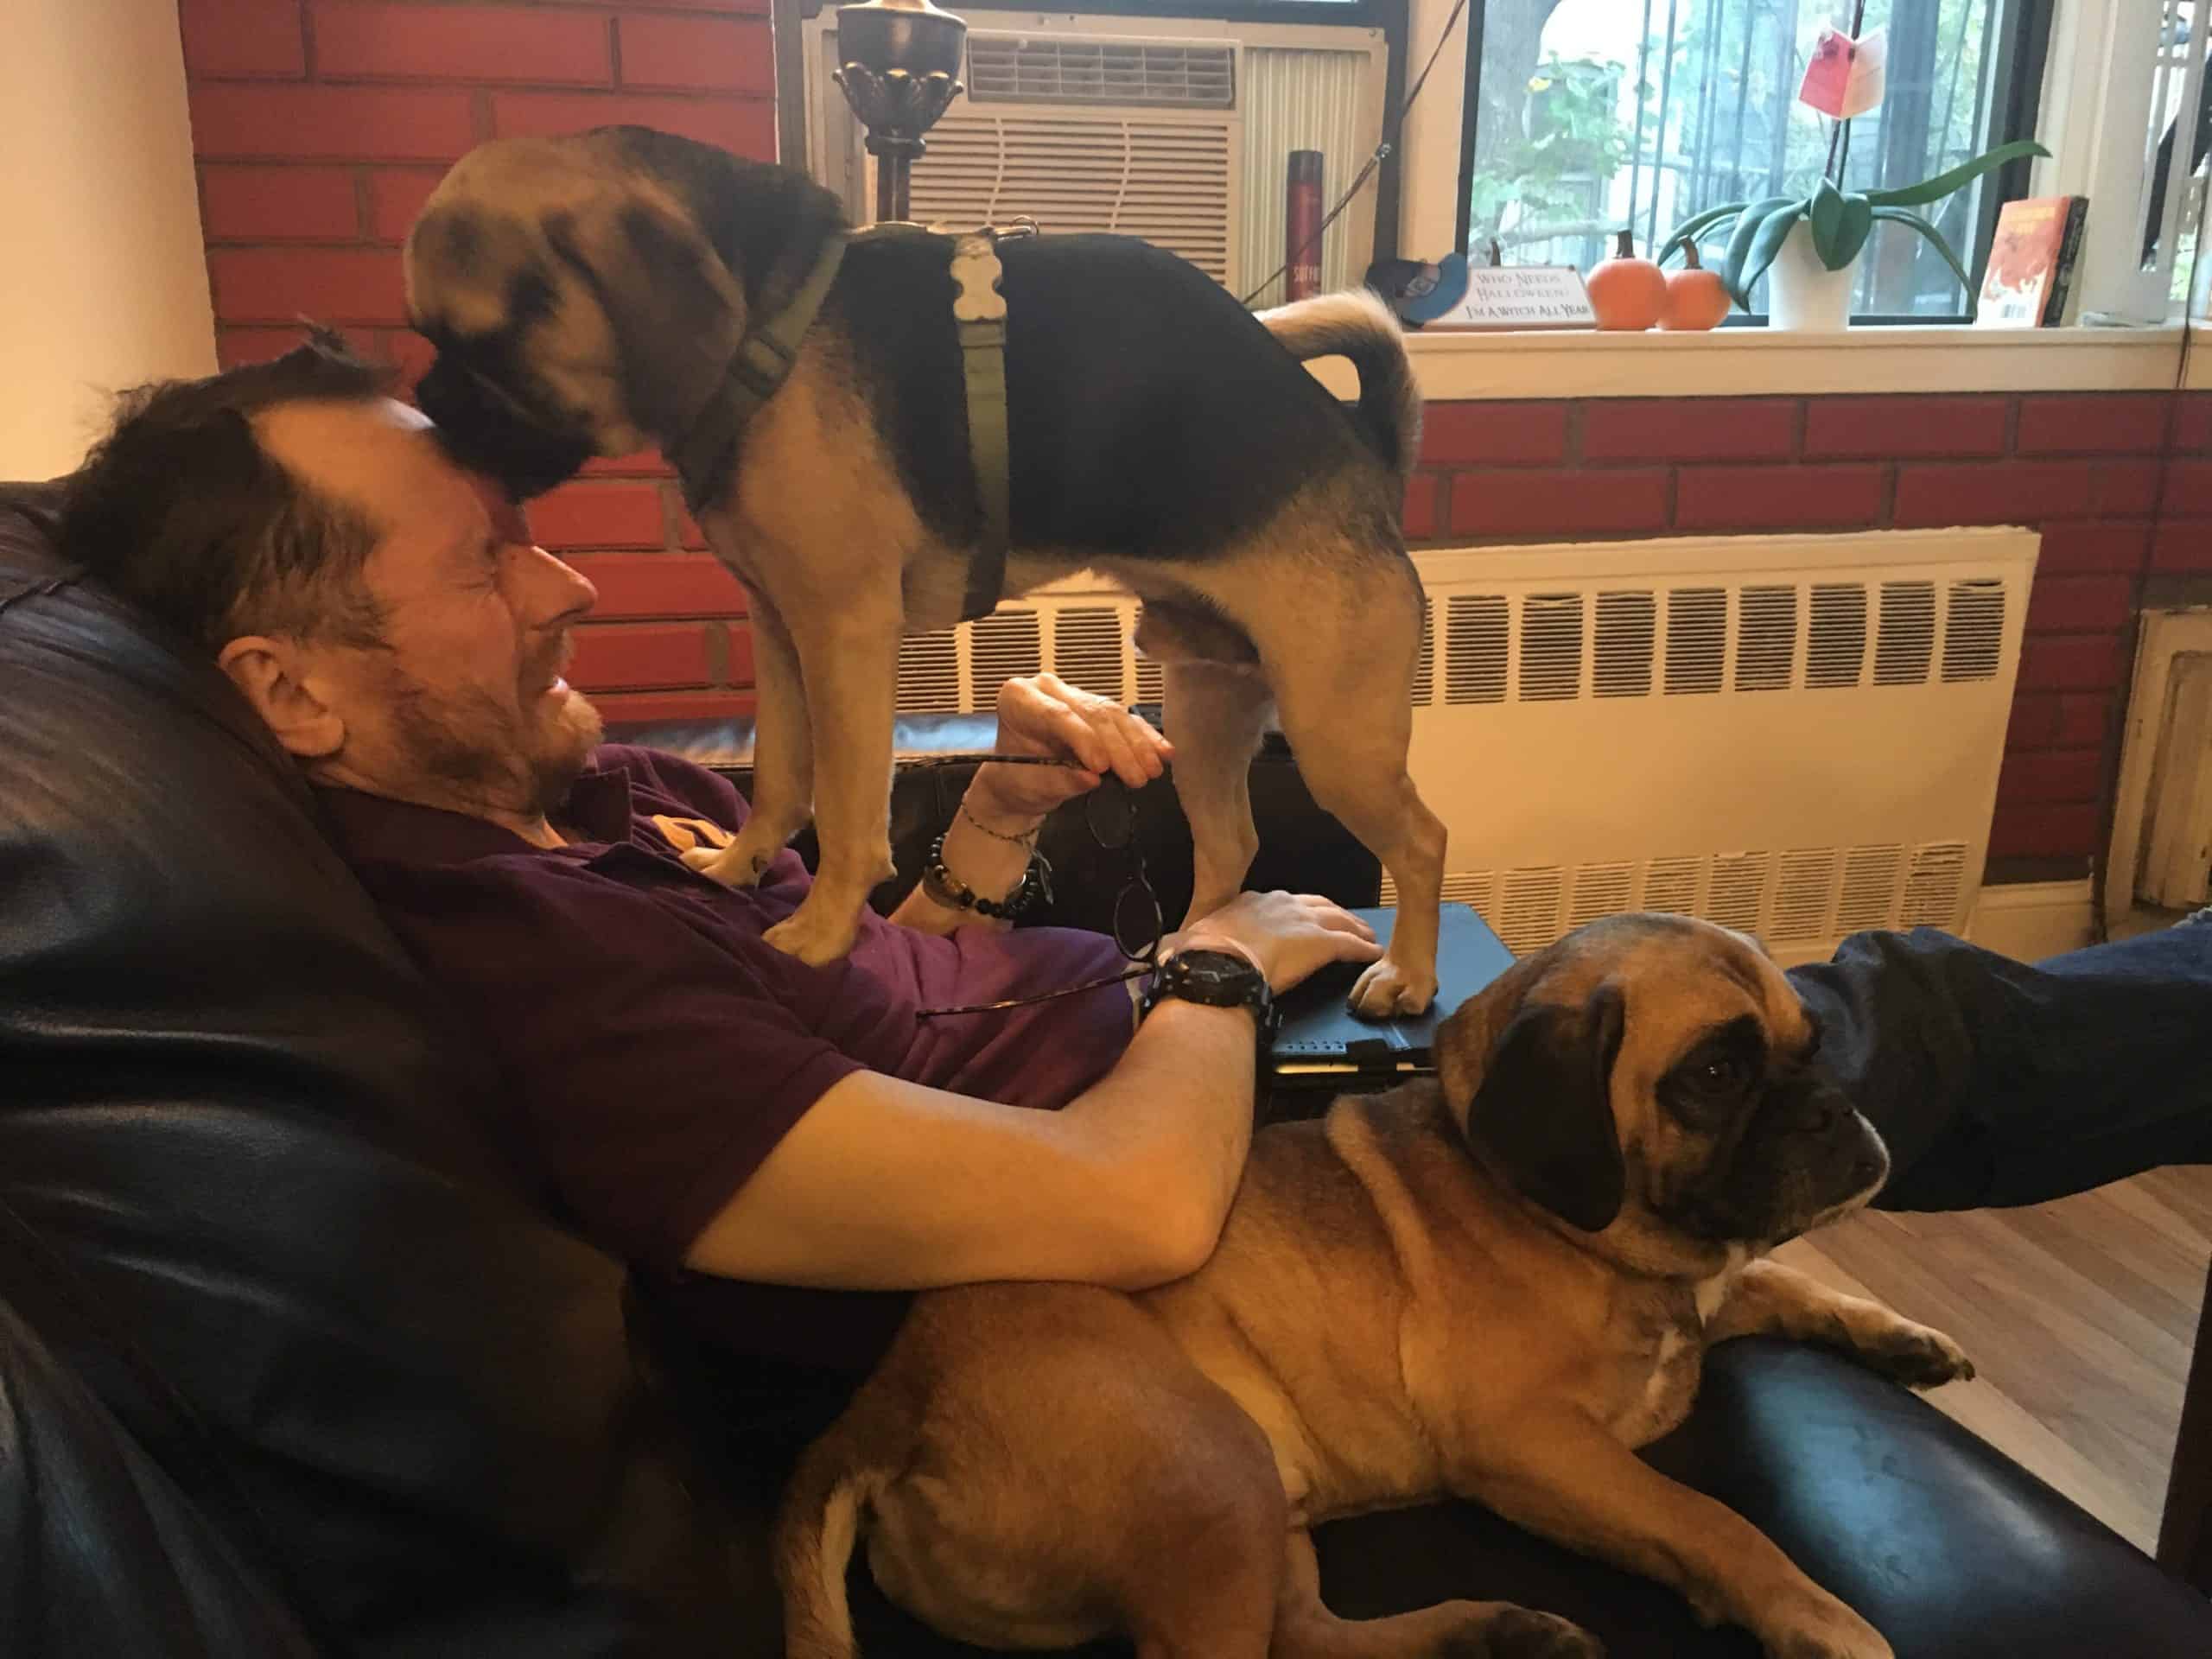 Jason Steadman sitting with two dogs